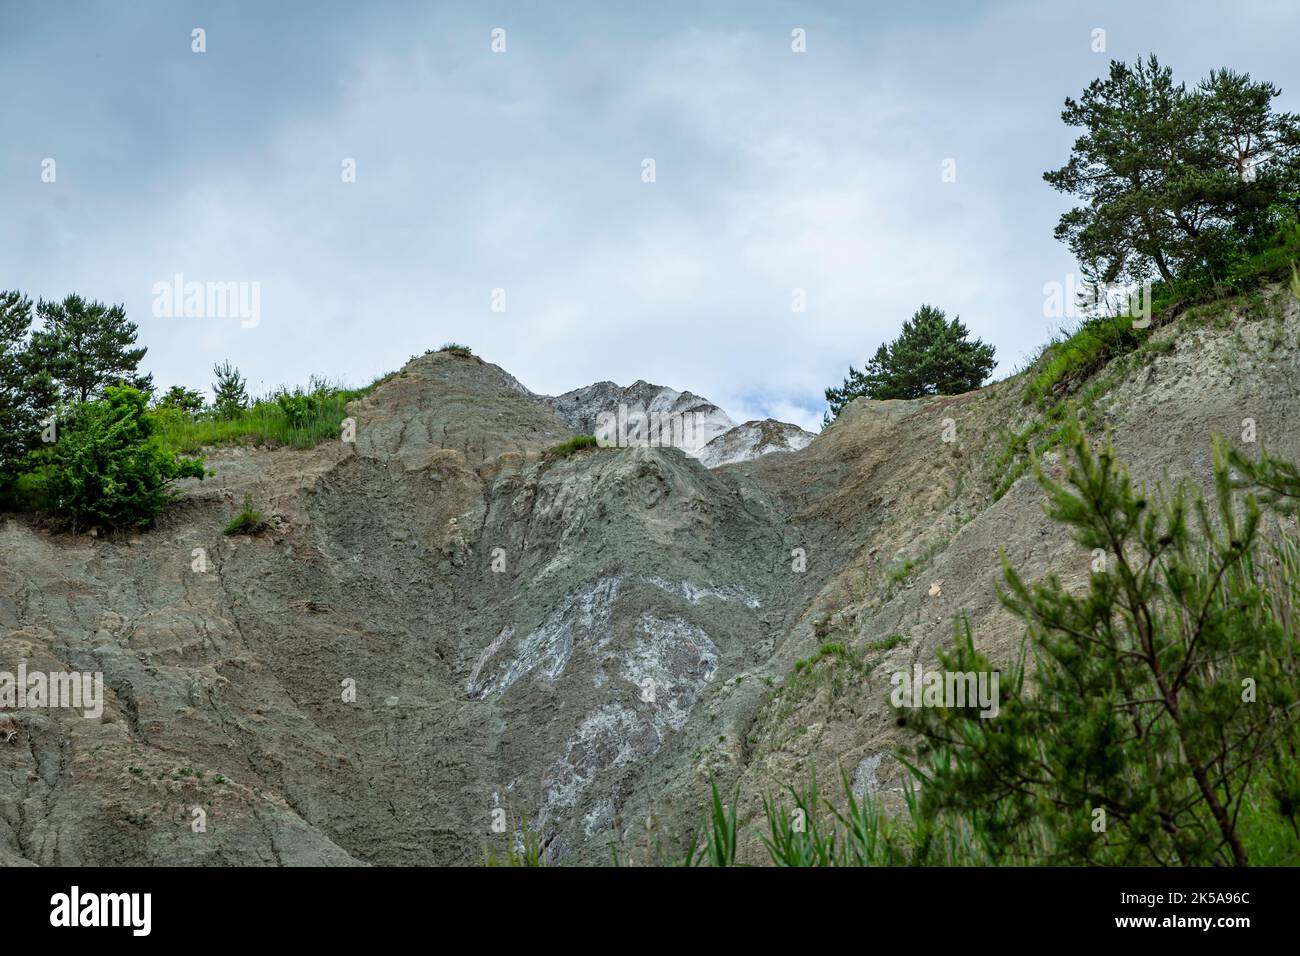 The mountain of salt from the Praid on June 19, 2021 in Praid, Harghita. Stock Photo